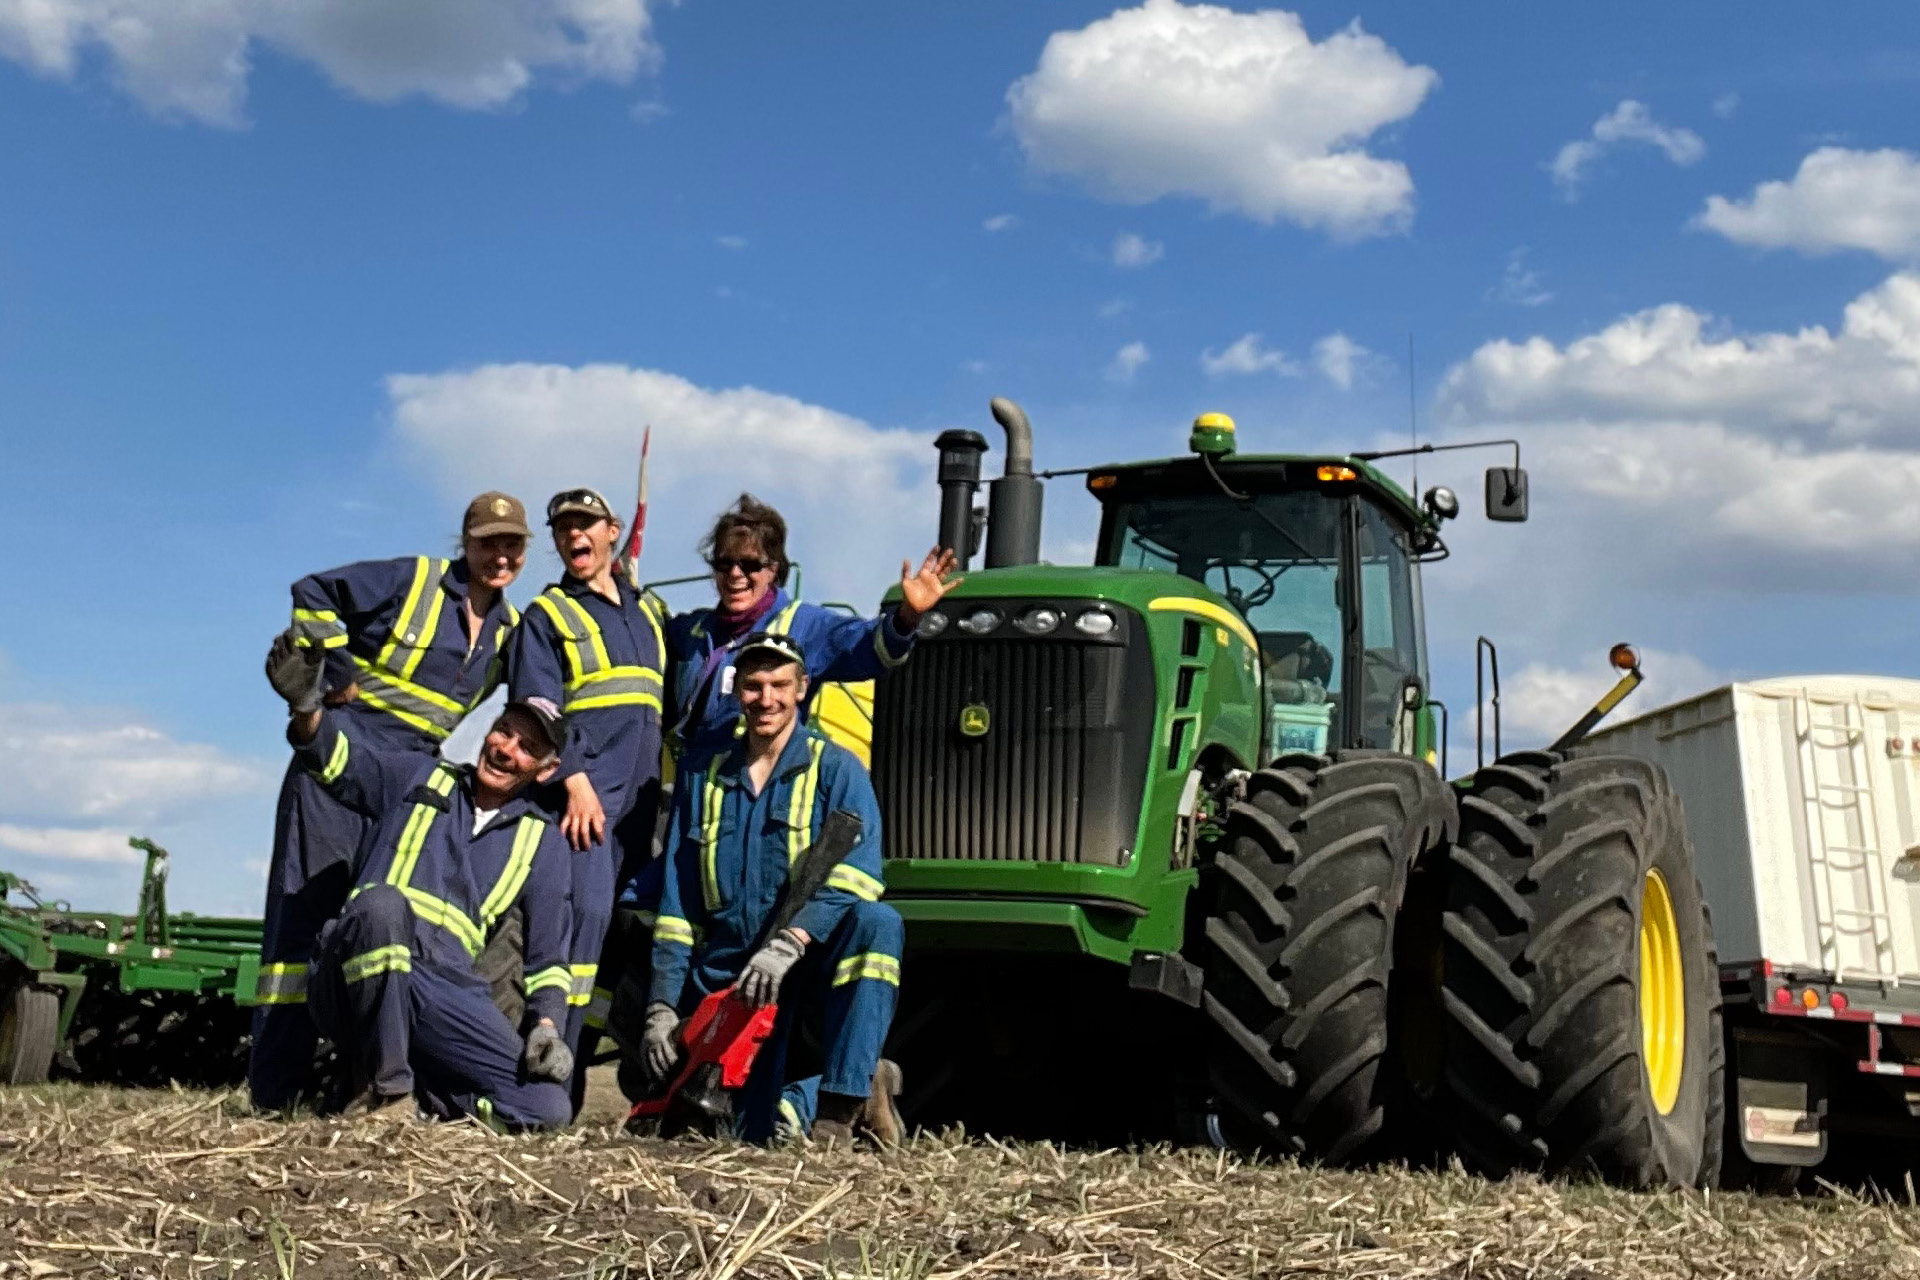 The Katernchuk family in front of an Air Seeder during spring seeding.